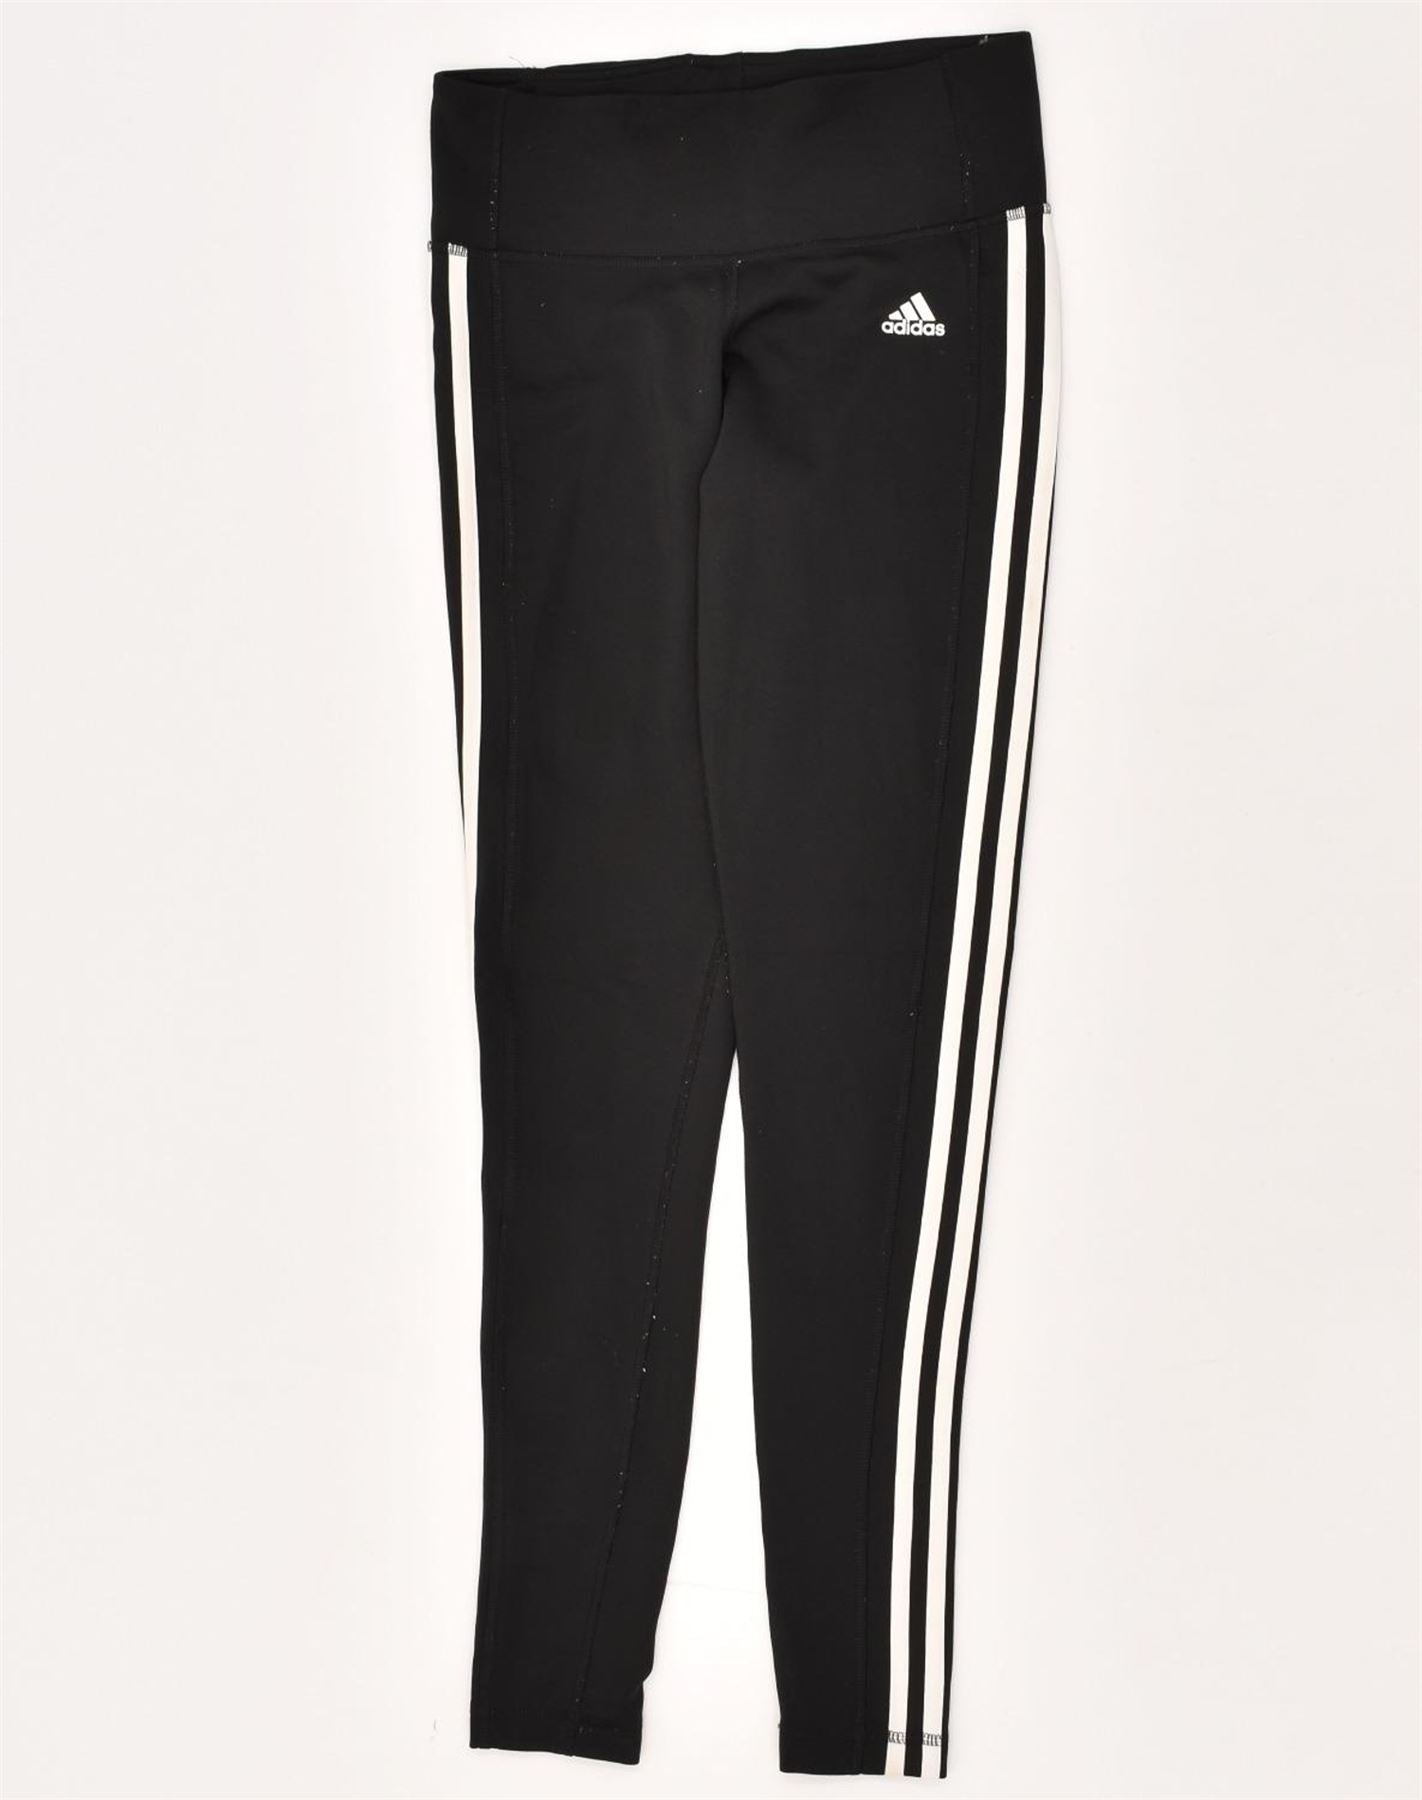 ADIDAS Womens Climalite Leggings UK 8/10 Small Black Polyester, Vintage &  Second-Hand Clothing Online